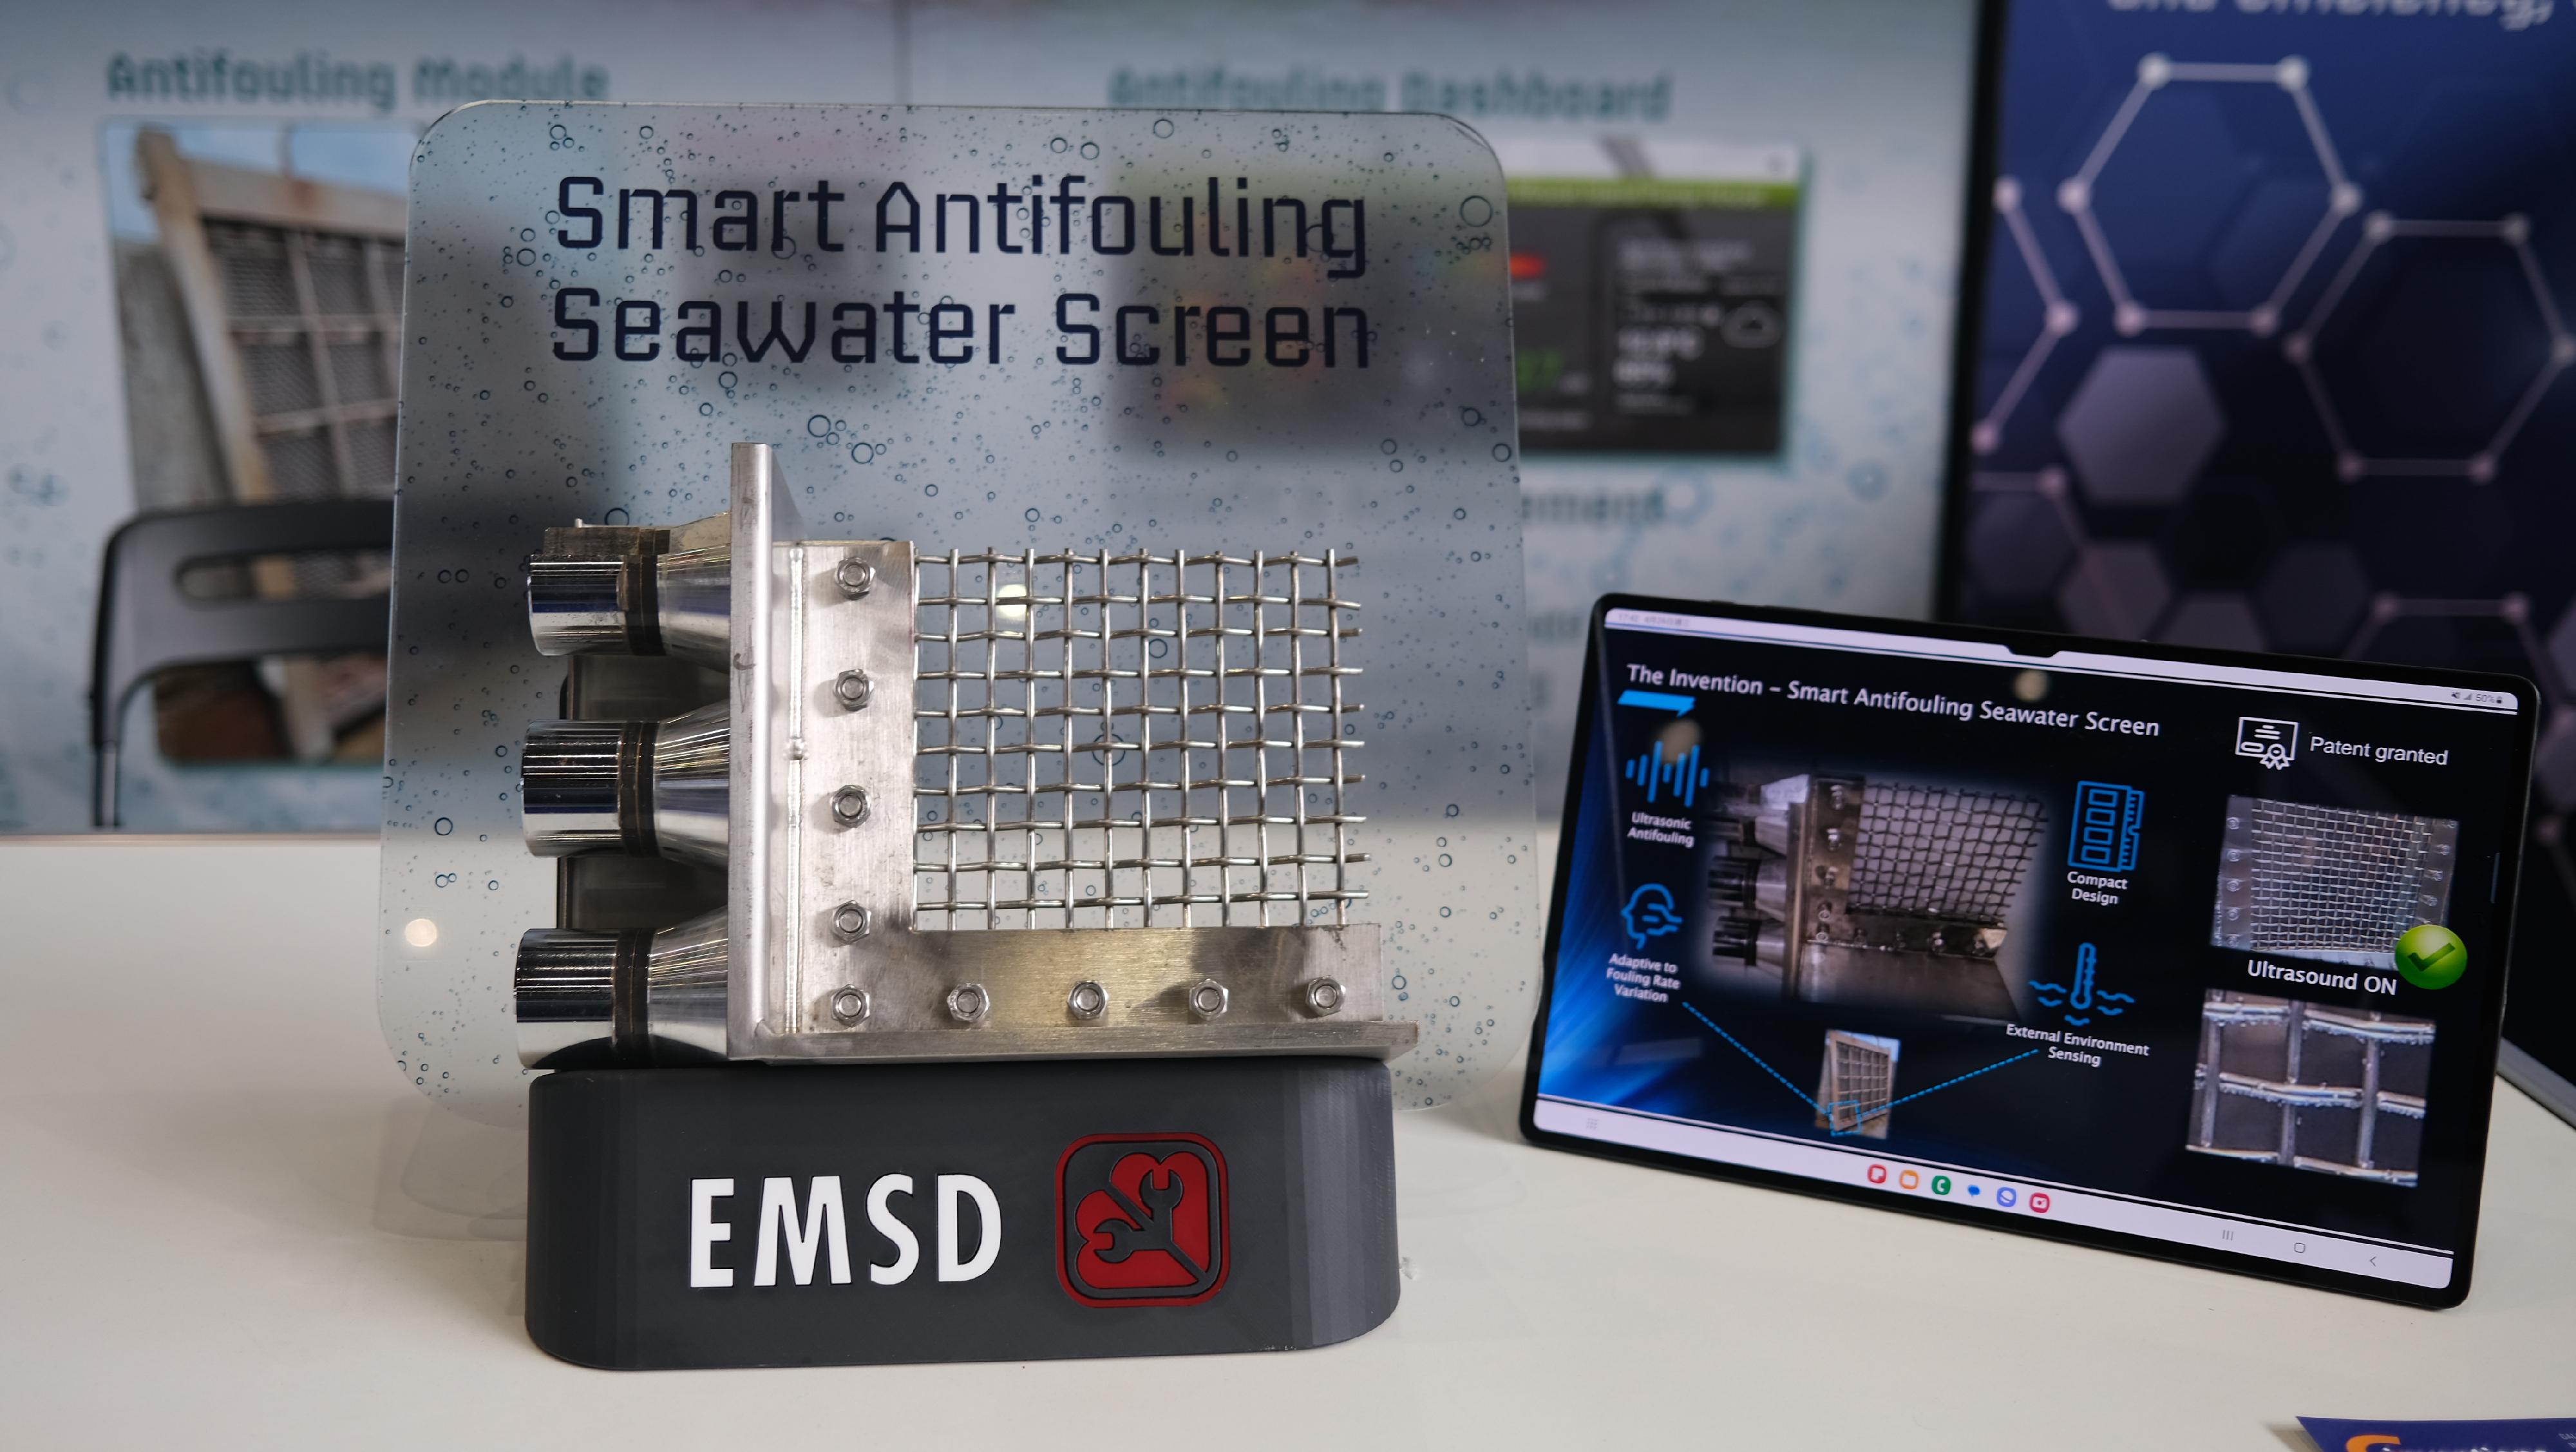 The Electrical and Mechanical Services Department achieved outstanding results at the 48th International Exhibition of Inventions of Geneva, winning one special award, three gold medals, seven silver medals and 12 bronze medals. Photo shows the Gold Medal-winning Smart Antifouling Seawater Screen.